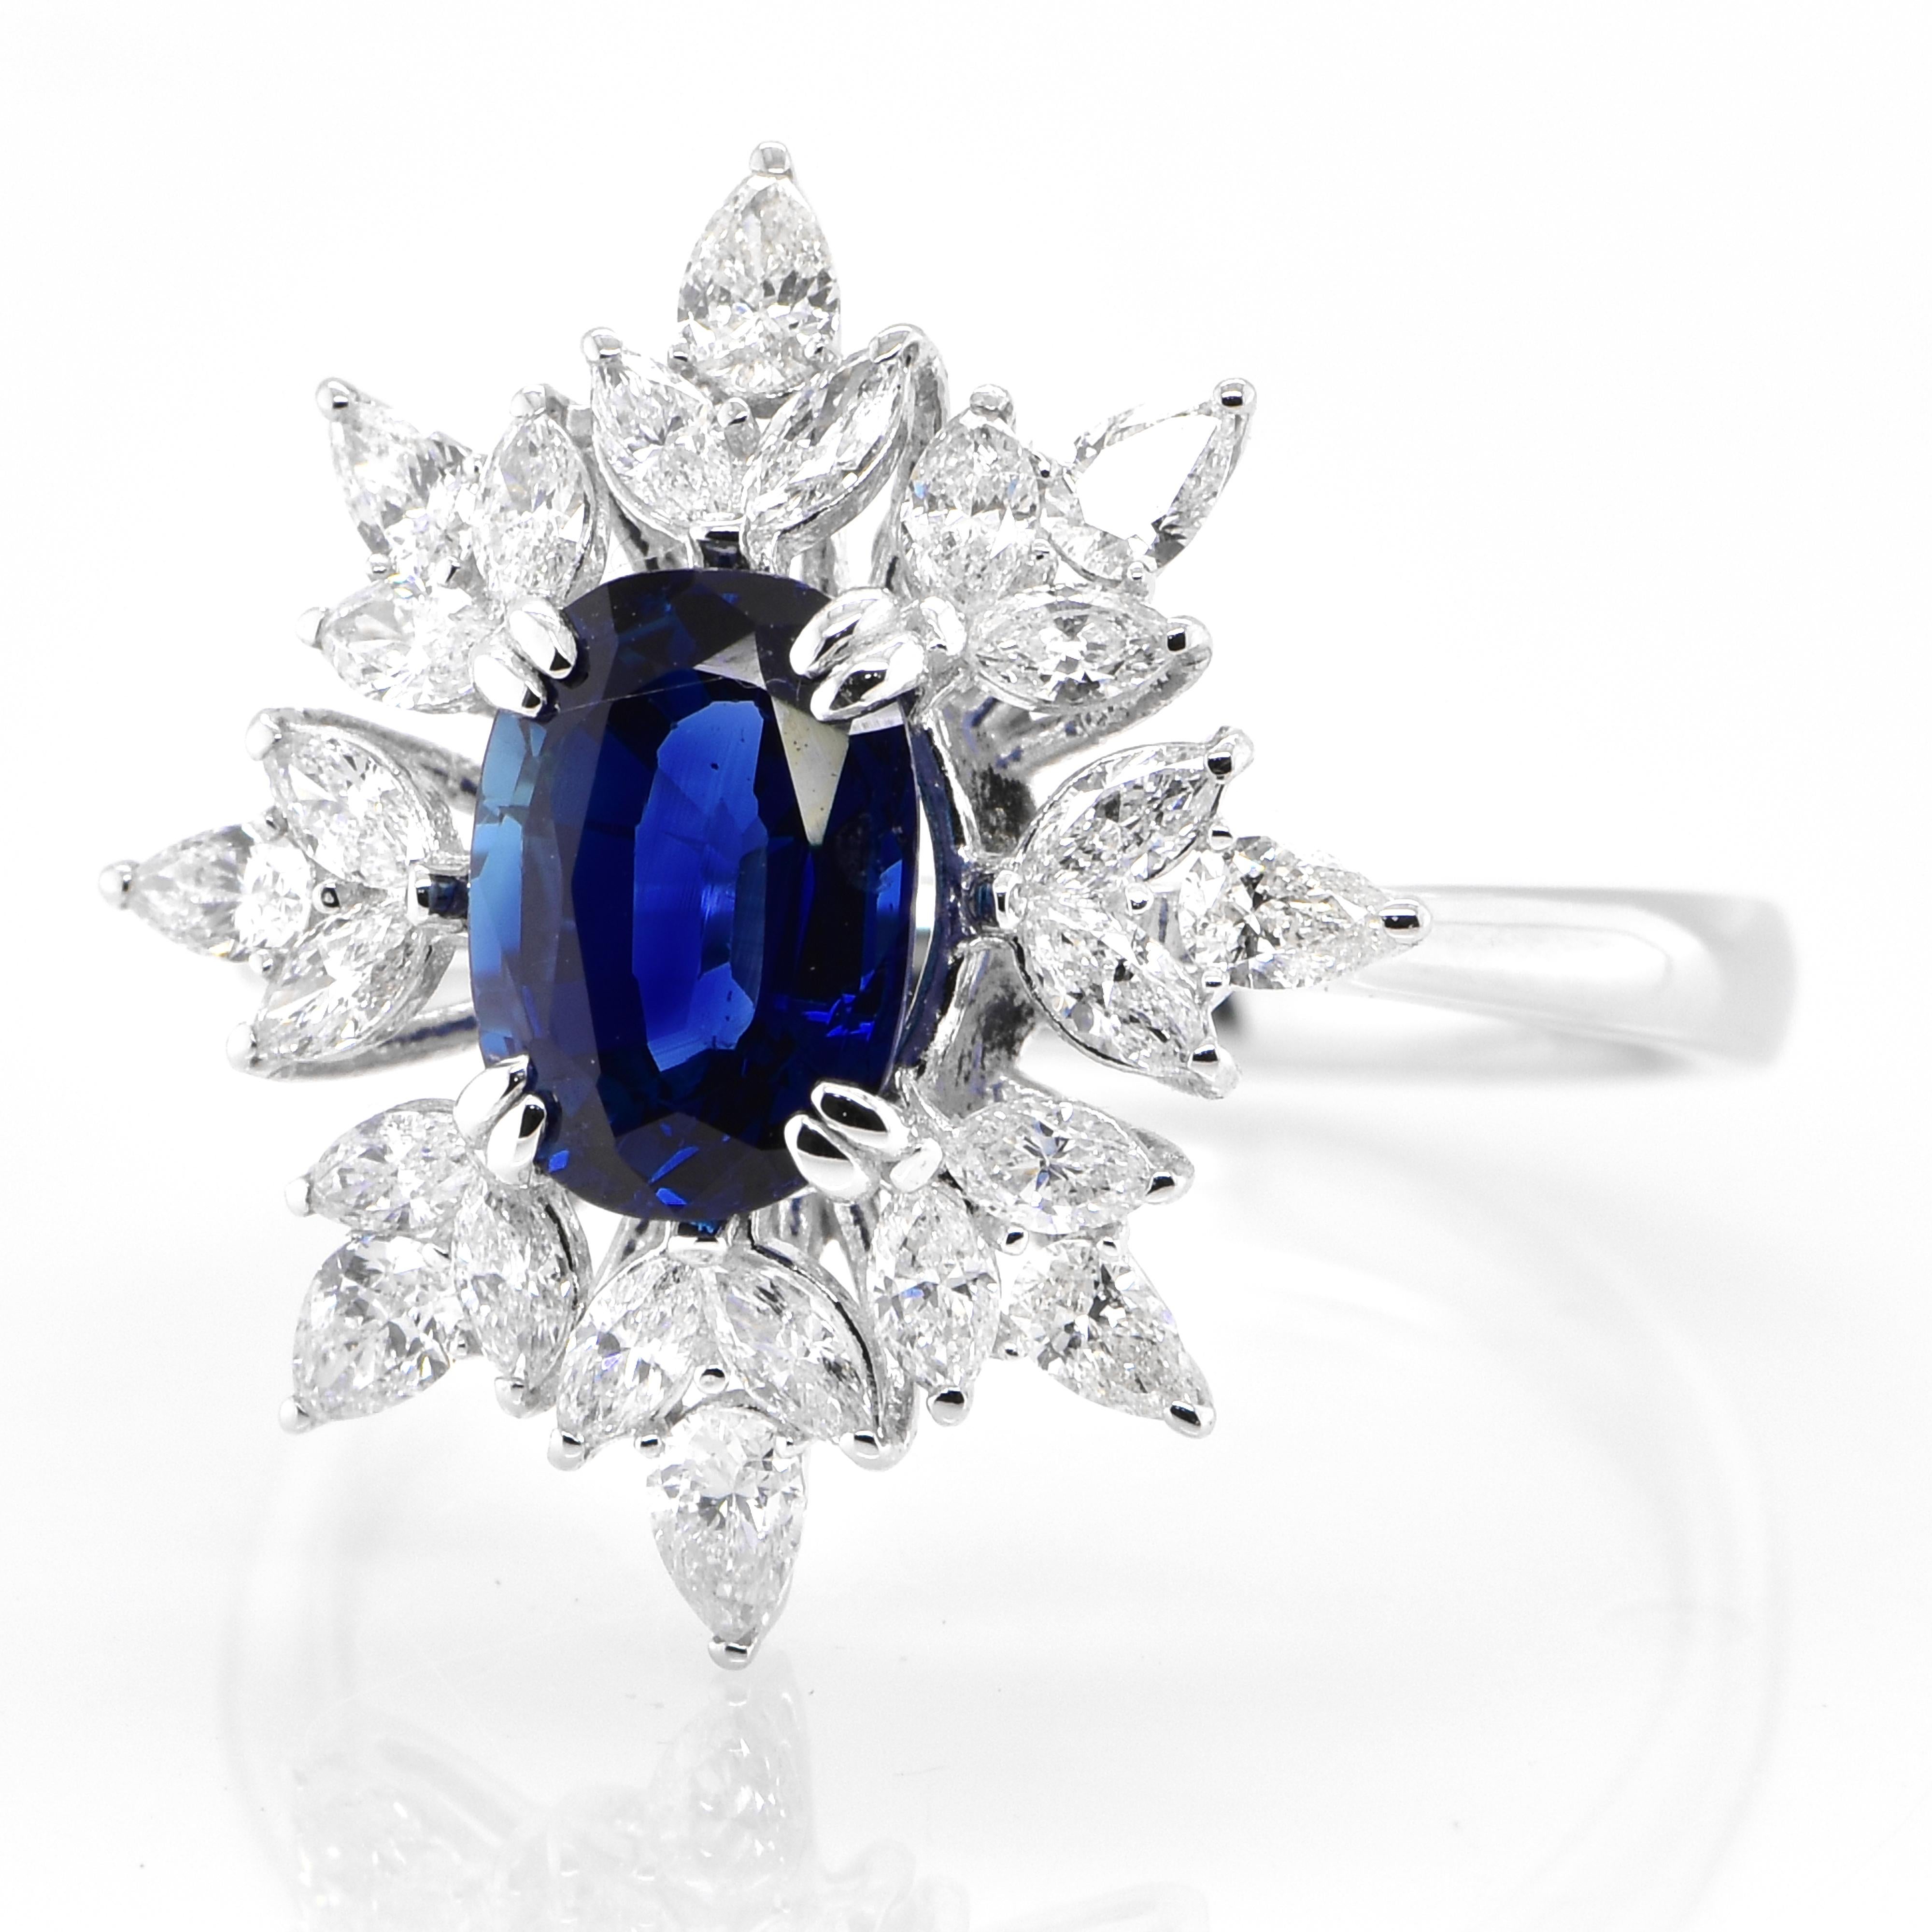 A beautiful ring featuring a AIGS Certified 1.80 Carat Natural Unheated, Royal Blue Blue Sapphire and 0.82 Carats Diamond Accents set in Platinum. Sapphires have extraordinary durability - they excel in hardness as well as toughness and durability